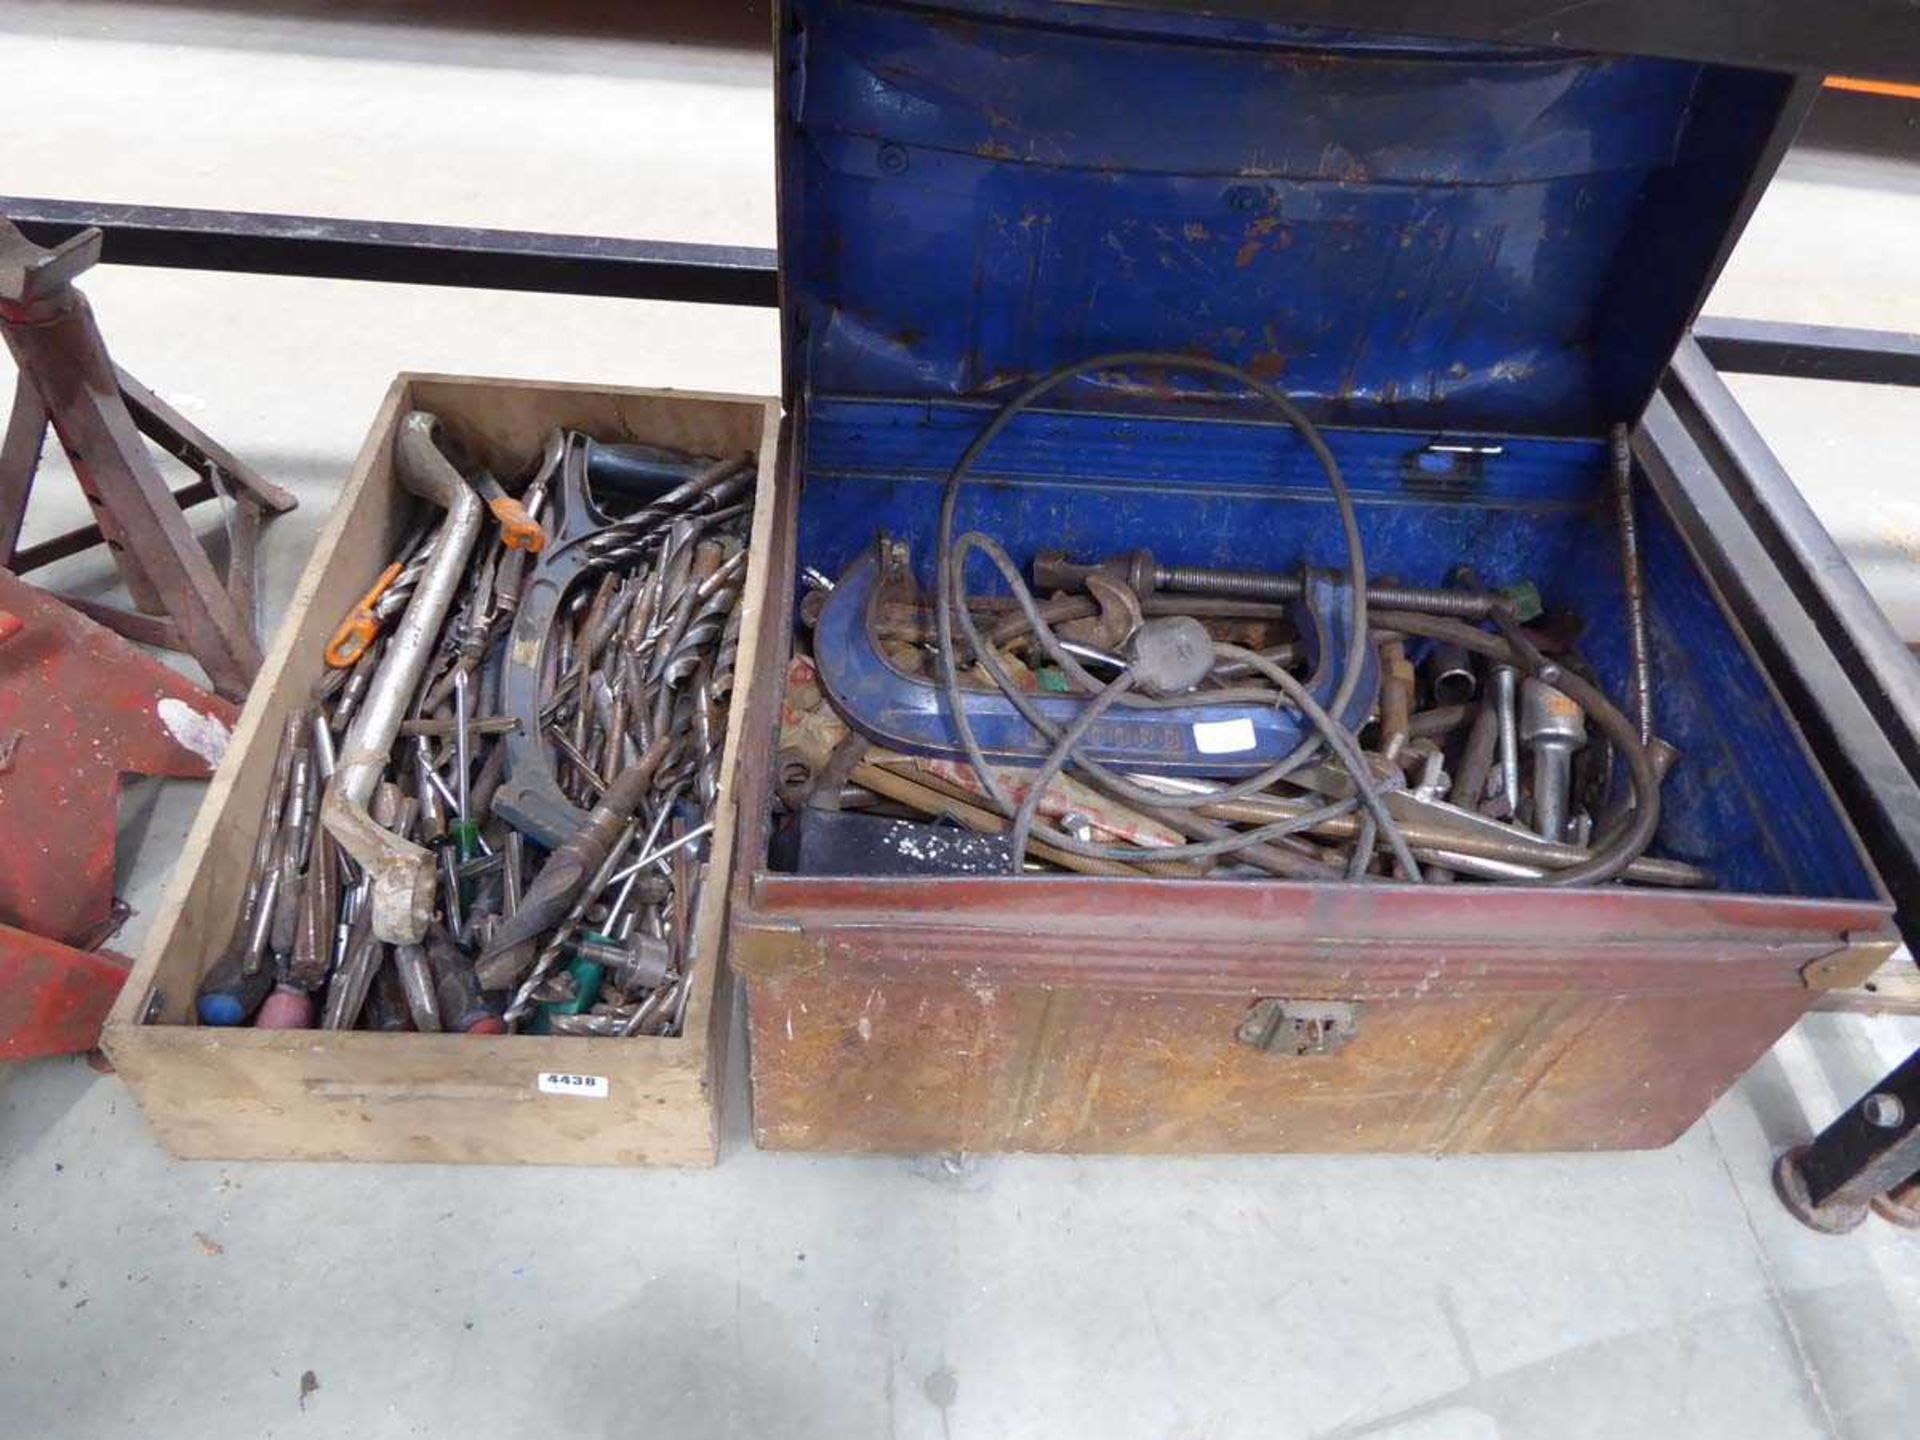 Box of drill bits and metal trunk of tools